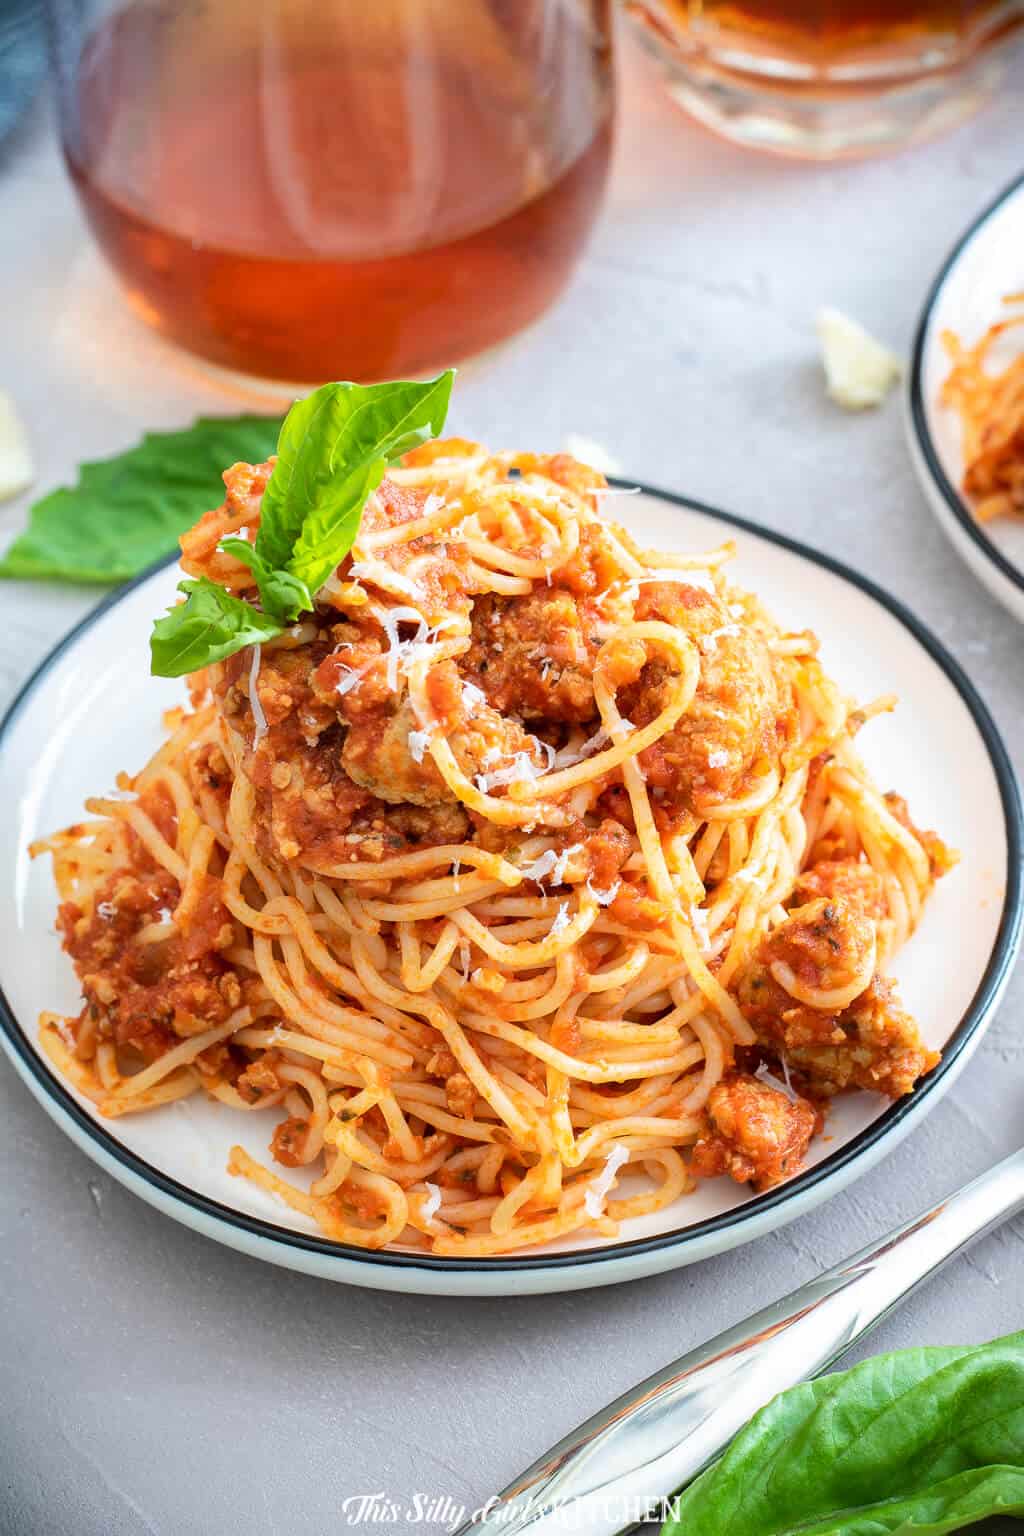 Meat Sauce With Easy Homemade Ground Turkey Sausage